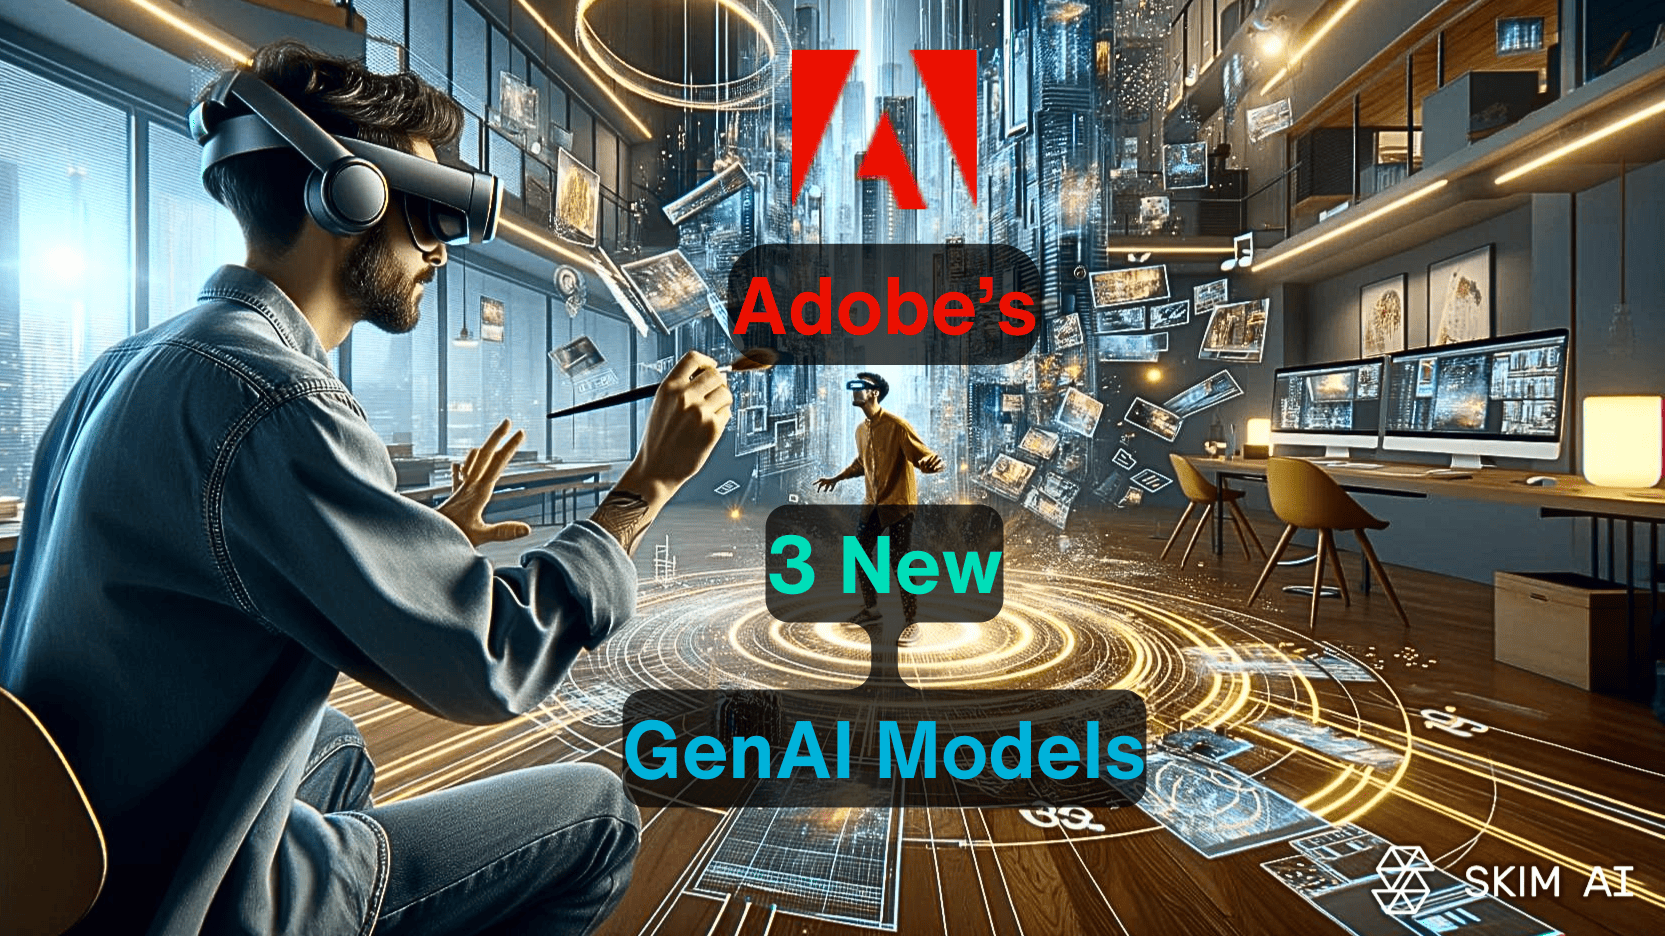 Adobe Does It Again With 3 New Generative AI Models